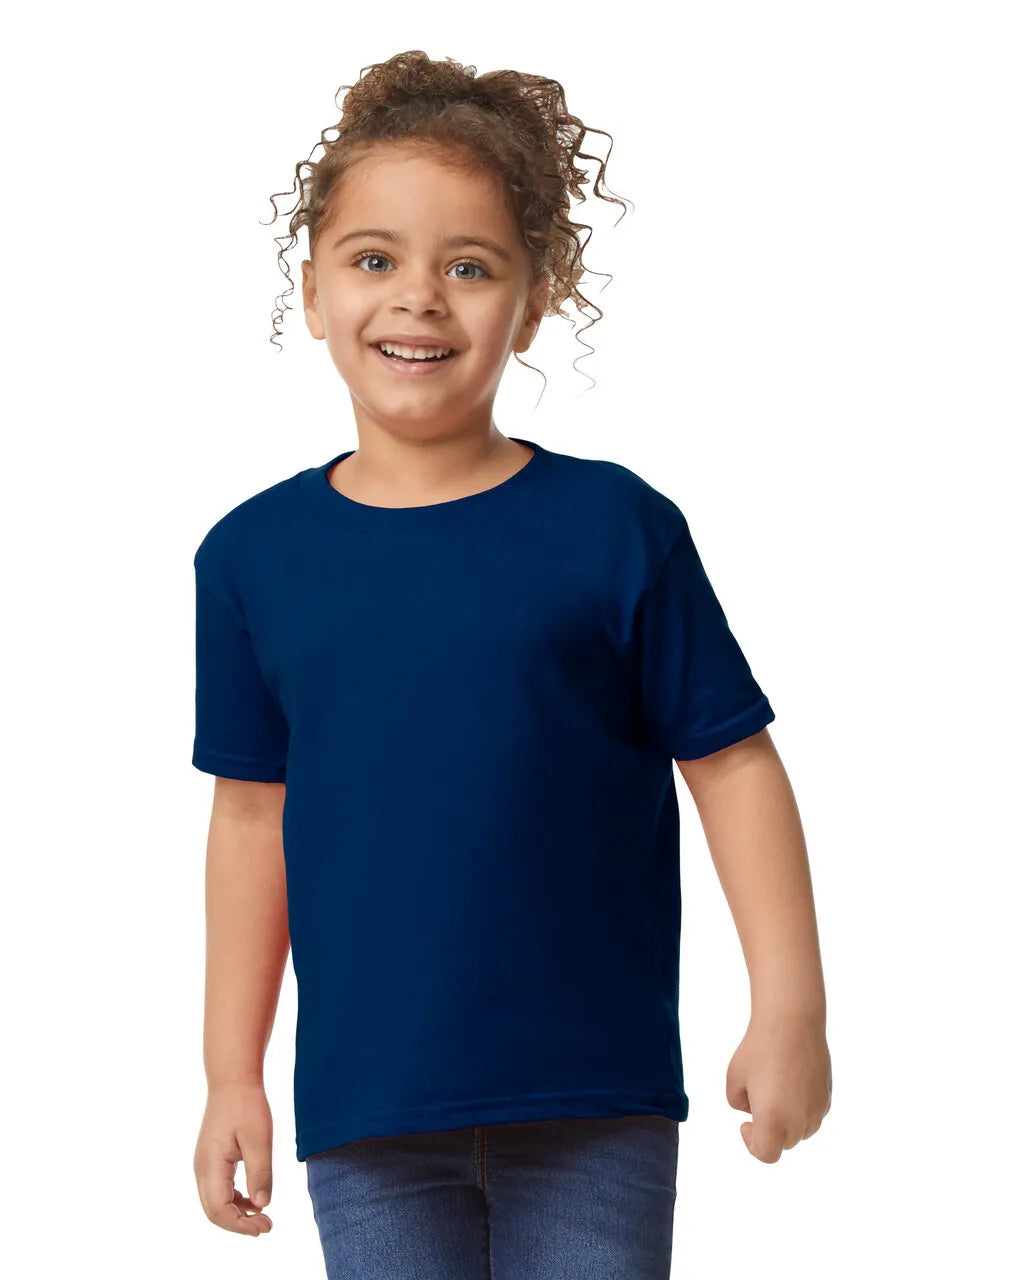 Toddlers Tshirt - Navy